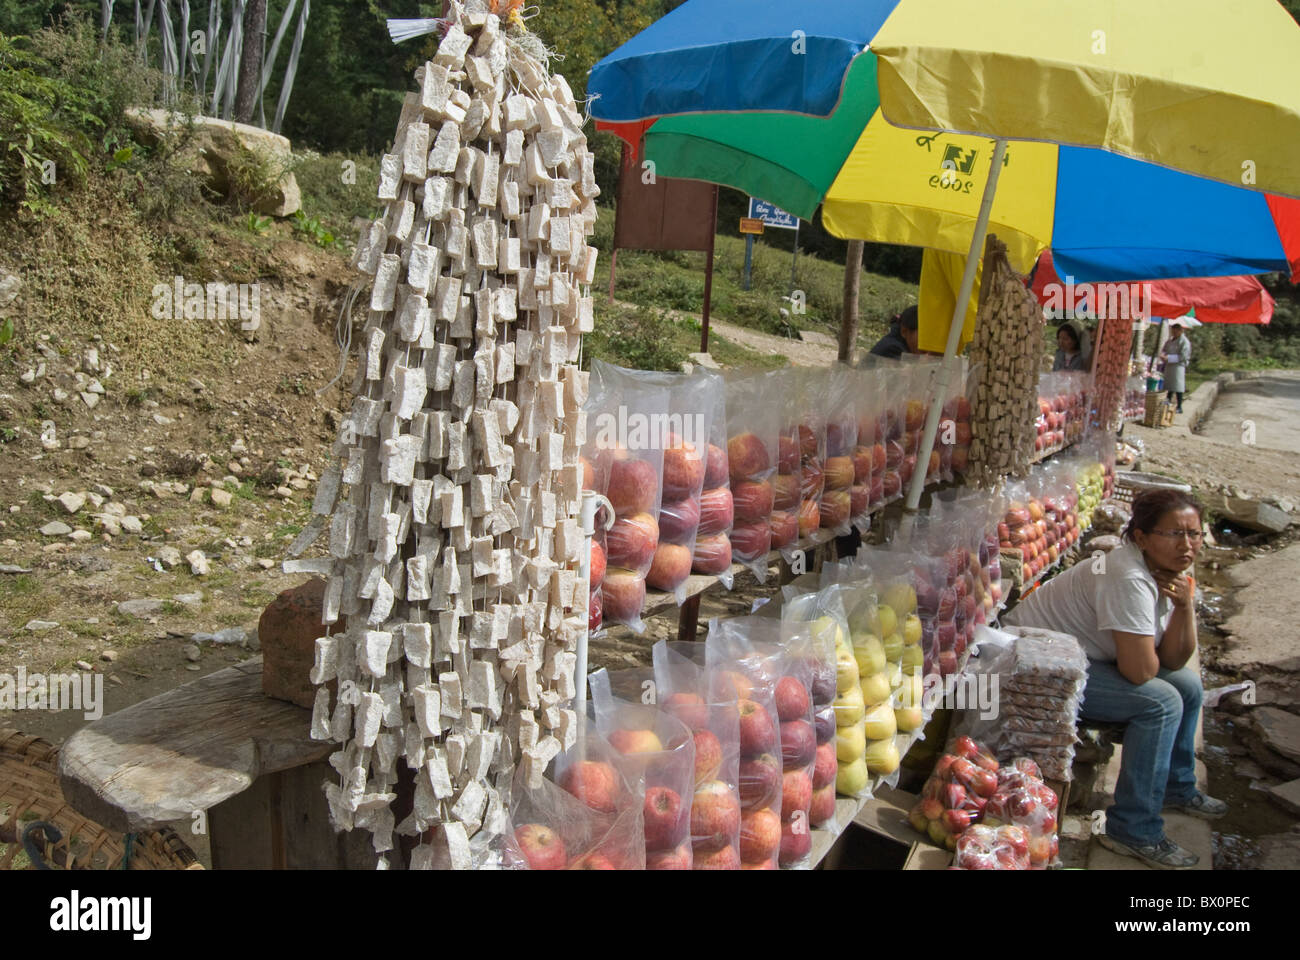 A street shop selling cheese and apples at the checkpoint on the way from Thimphu to Punakha. Stock Photo